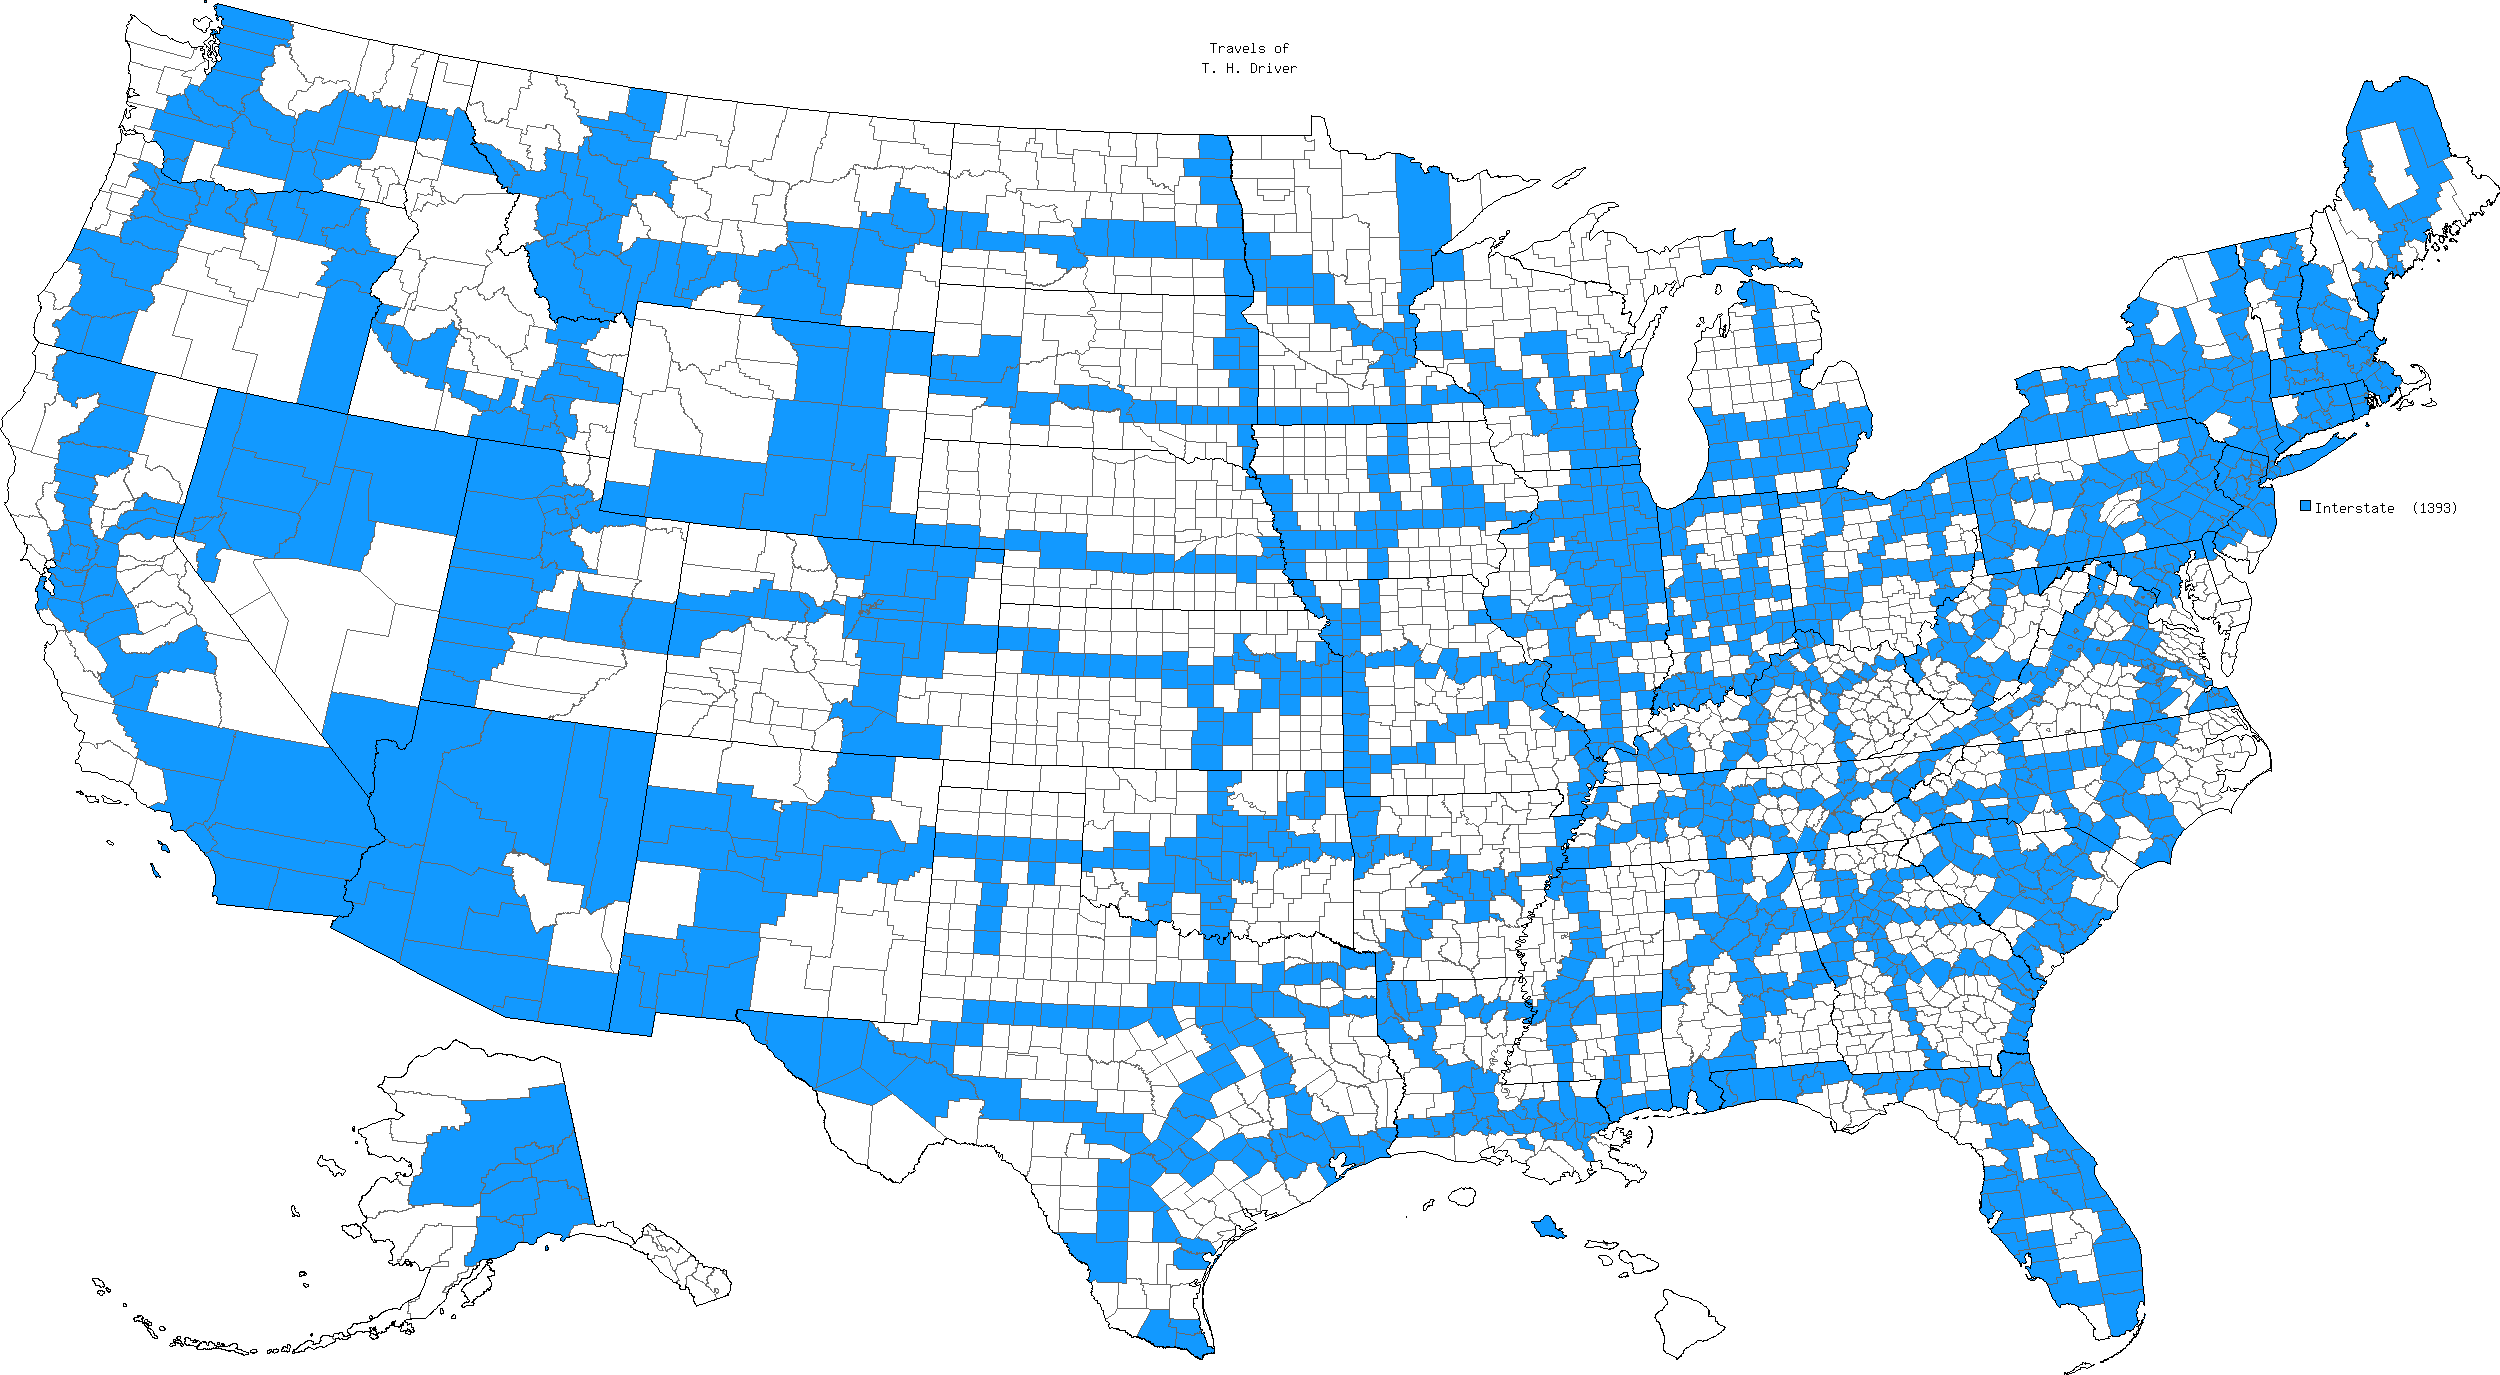 U.S. counties with interstate highways. Map created by howderfamily.com; (CC BY-NC-SA 2.0)